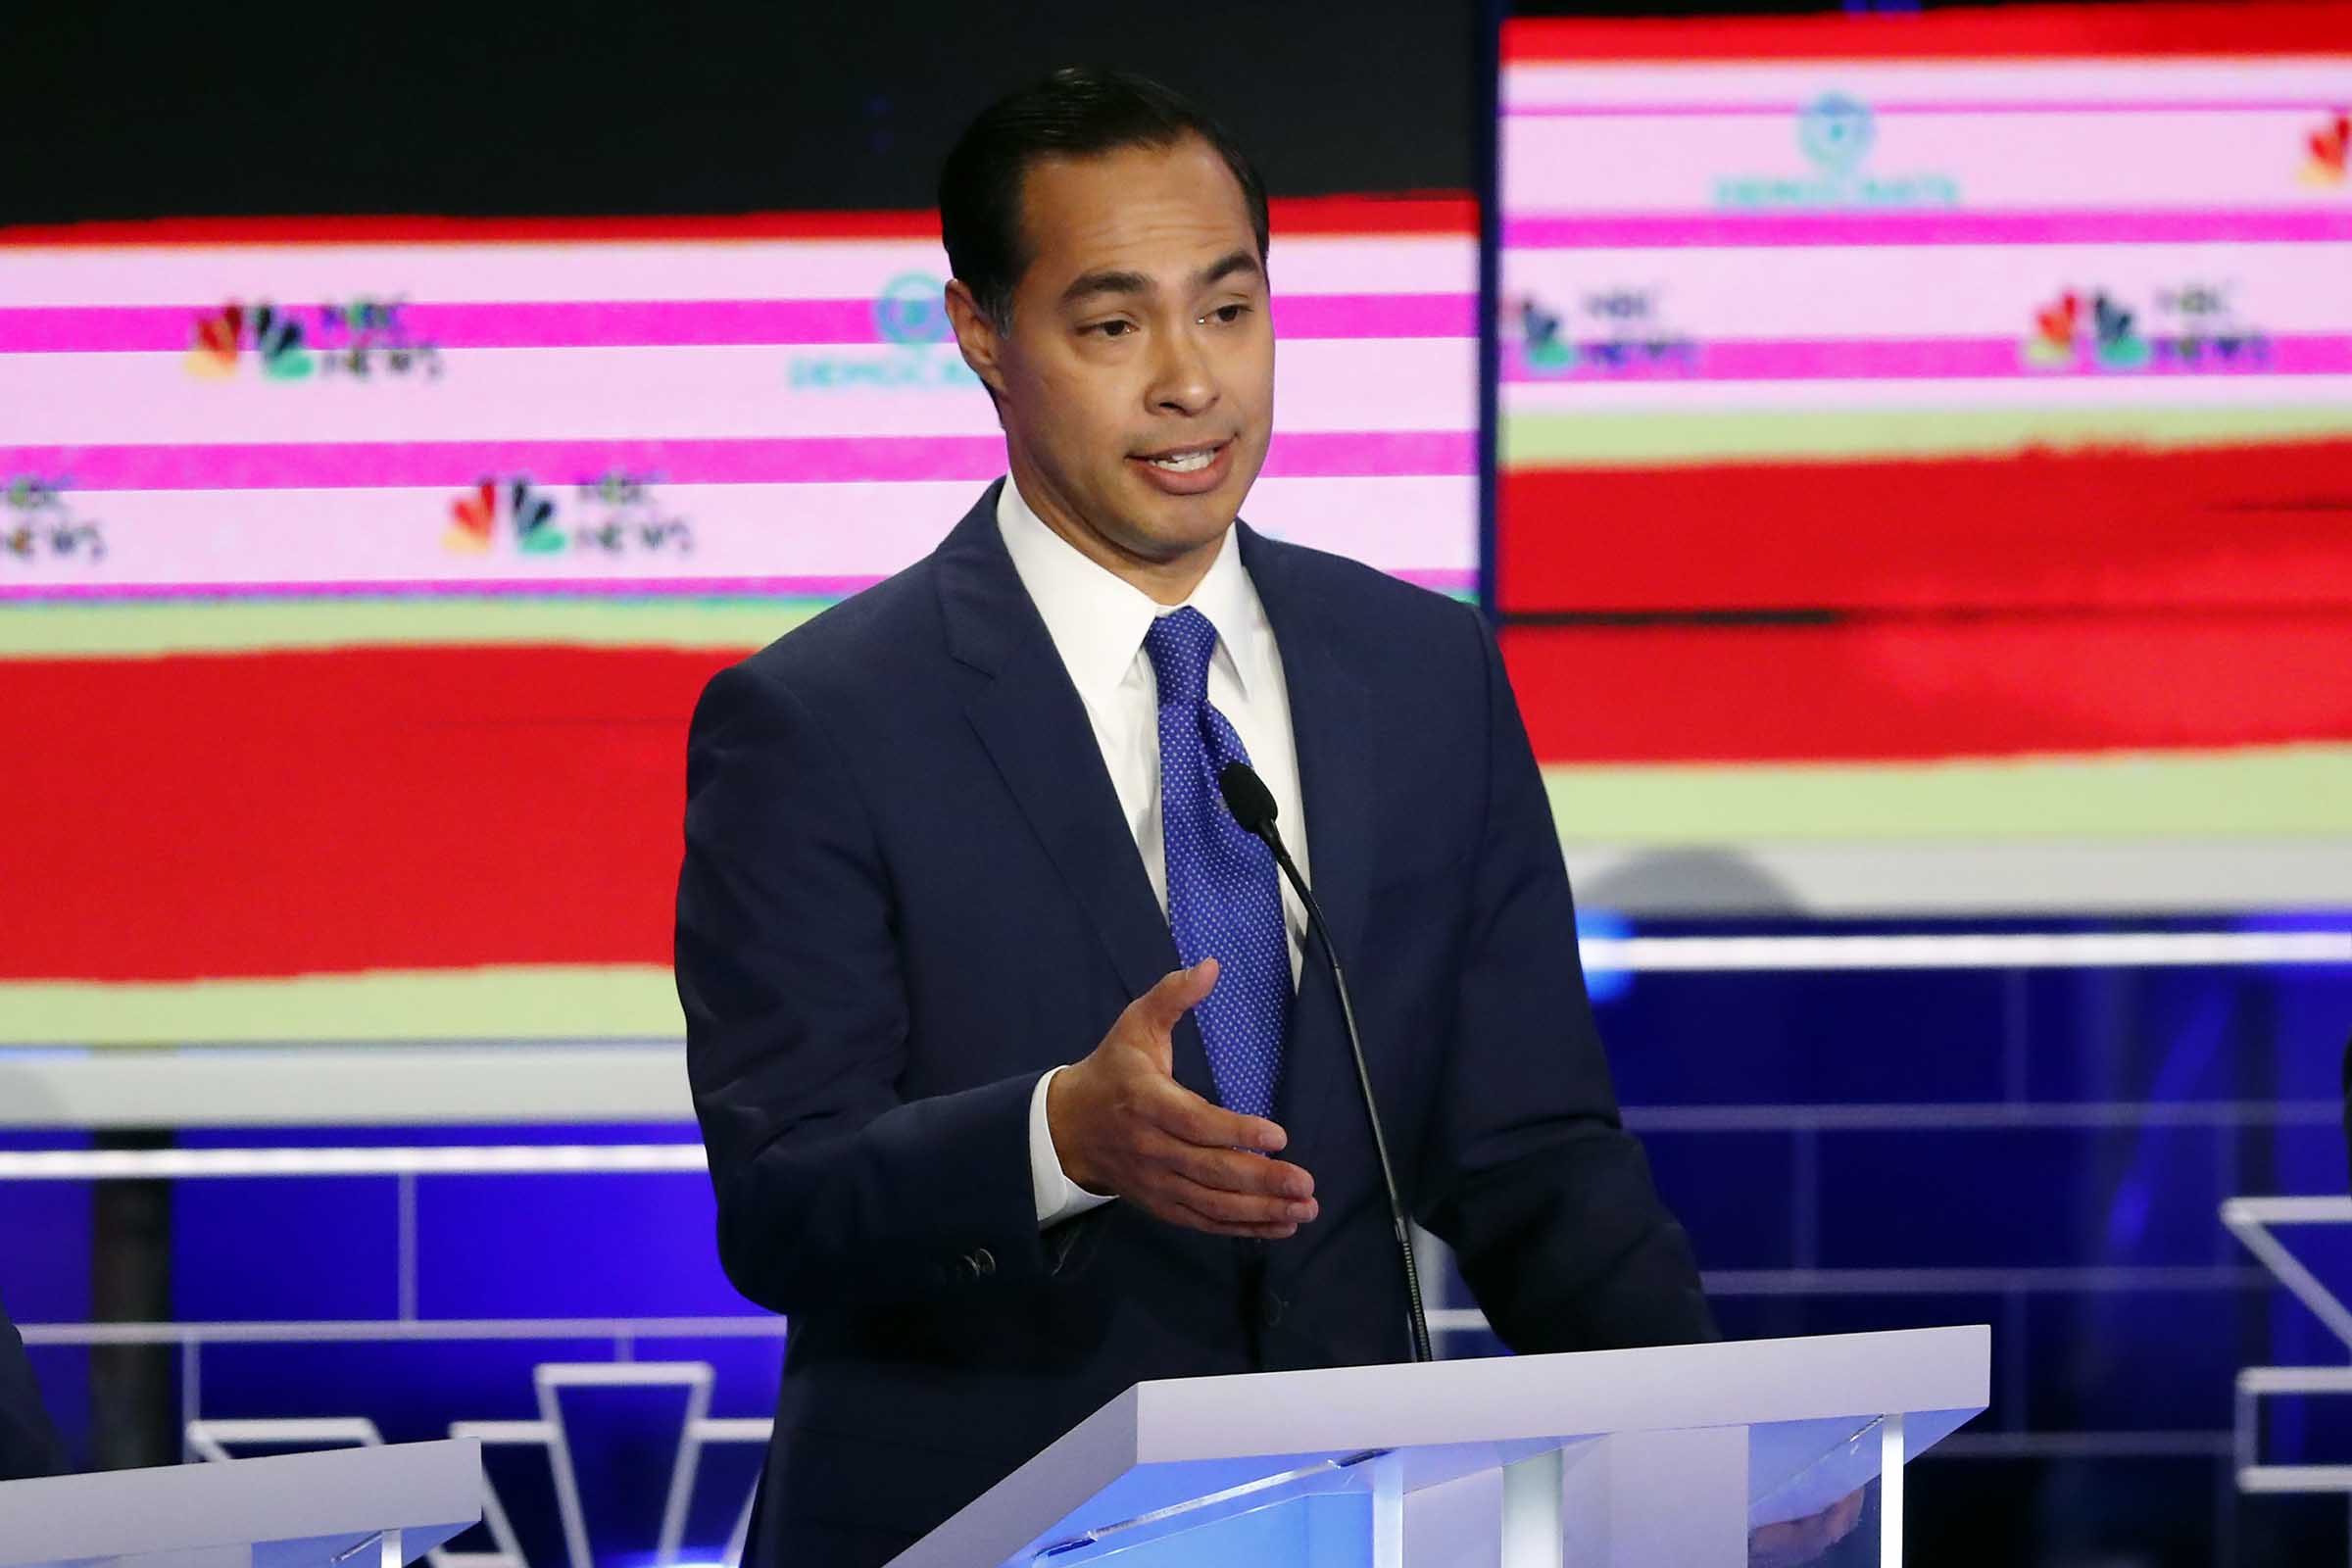 Democratic presidential candidate former Housing and Urban Development Secretary Julian Castro speaks during a Democratic primary debate hosted by NBC News at the Adrienne Arsht Center for the Performing Art, Wednesday, June 26, 2019, in Miami. (Wilfredo Lee—AP)